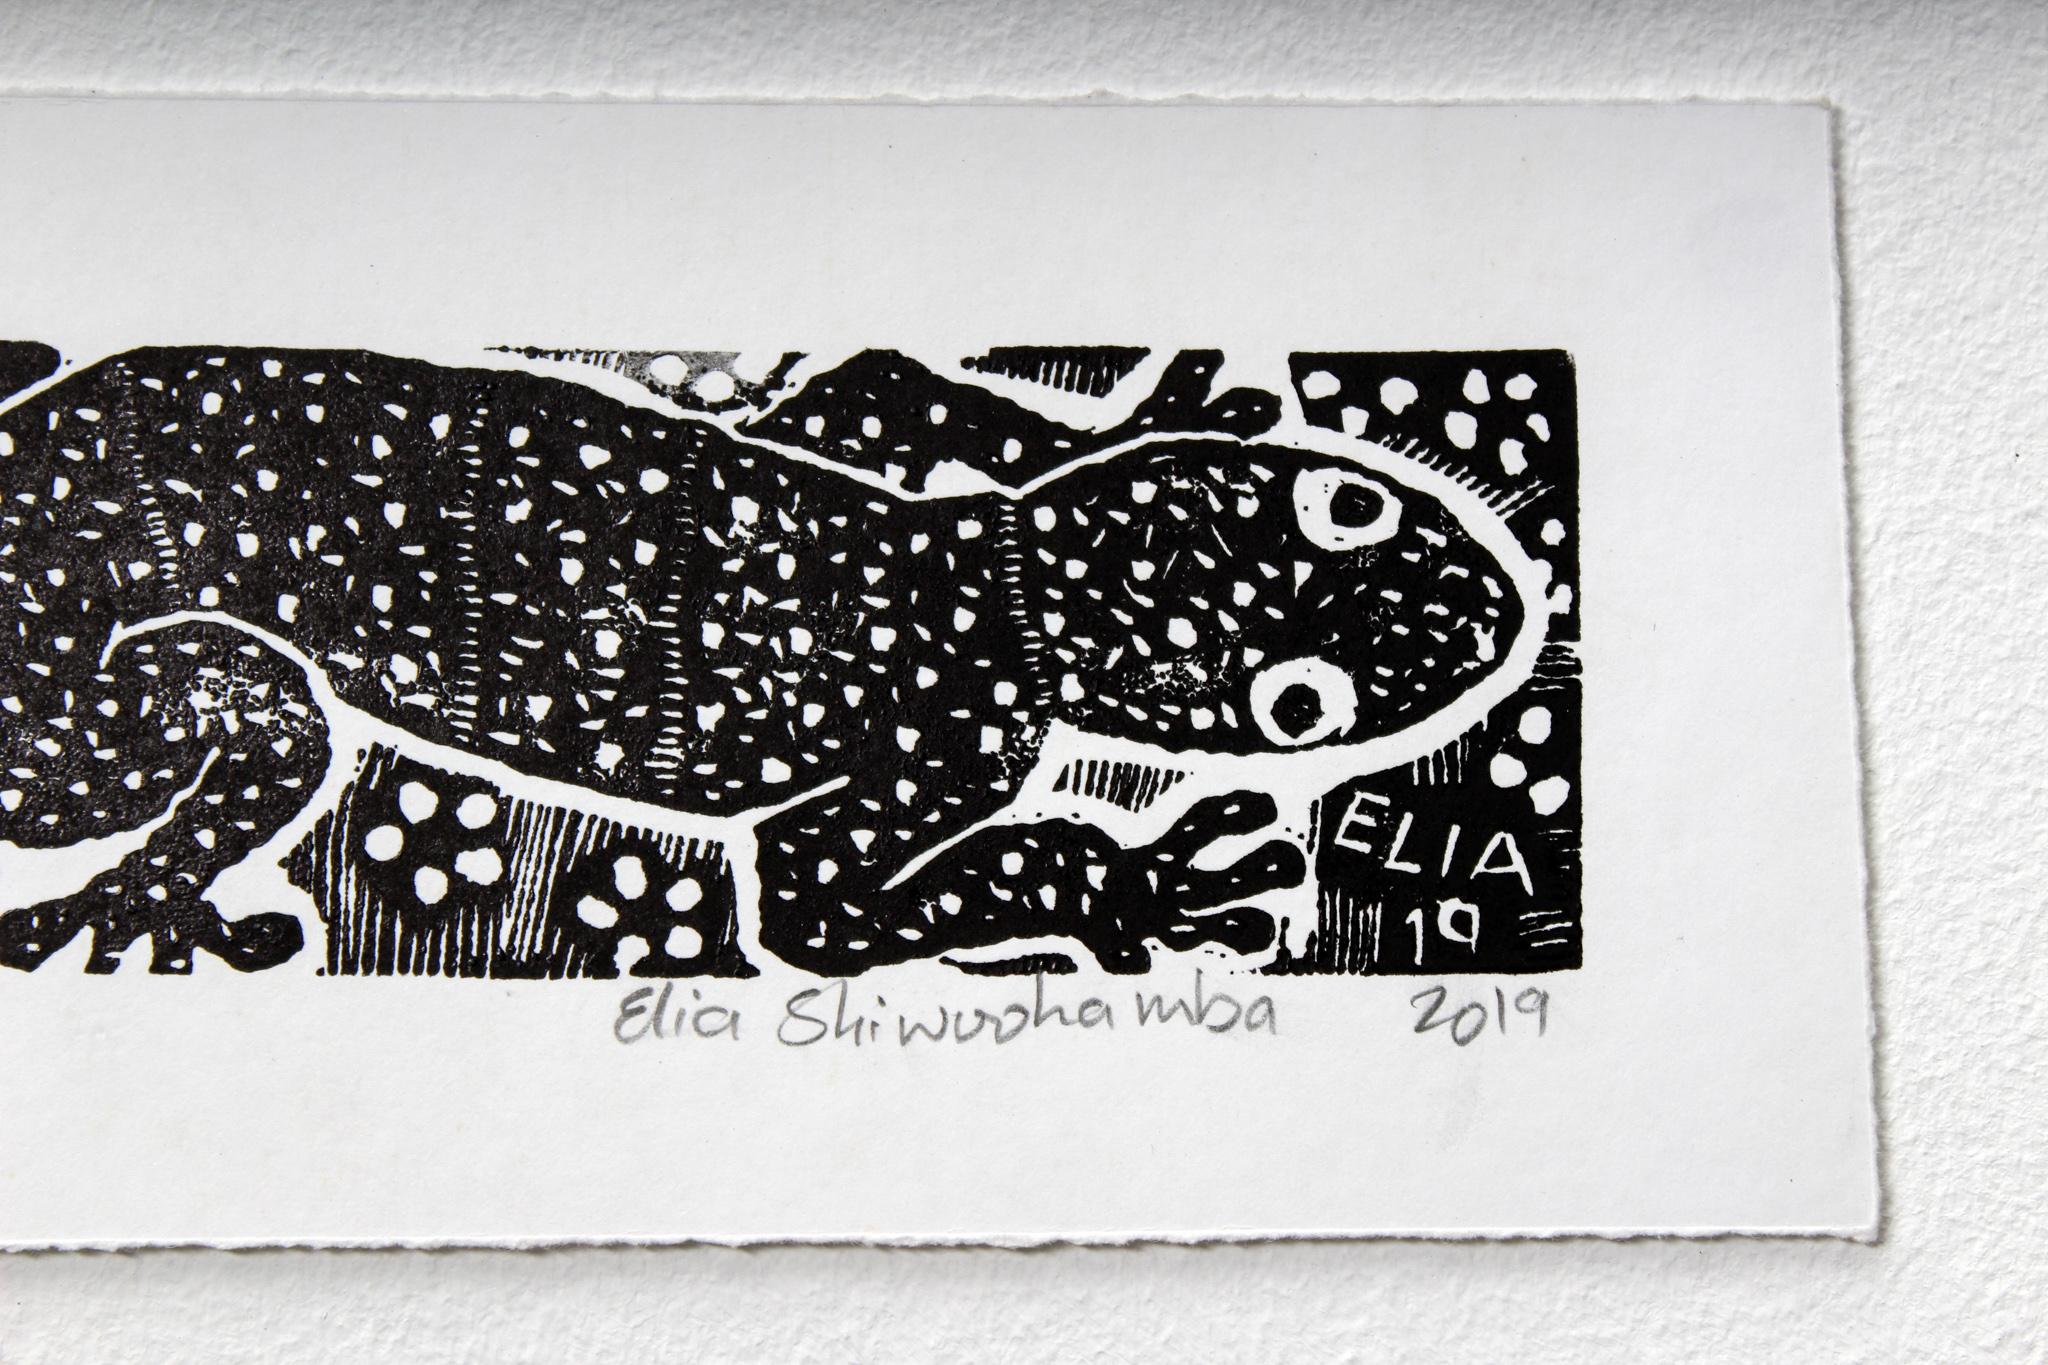 The gecko, Linoleum block prints on paper.

Elia Shiwoohamba was born in 1981 in Windhoek, Namibia. He graduated from the John Muafangejo Art Centre in Windhoek in 2006. Specialising in printmaking and sculpture, Shiwoohamba works as a professional